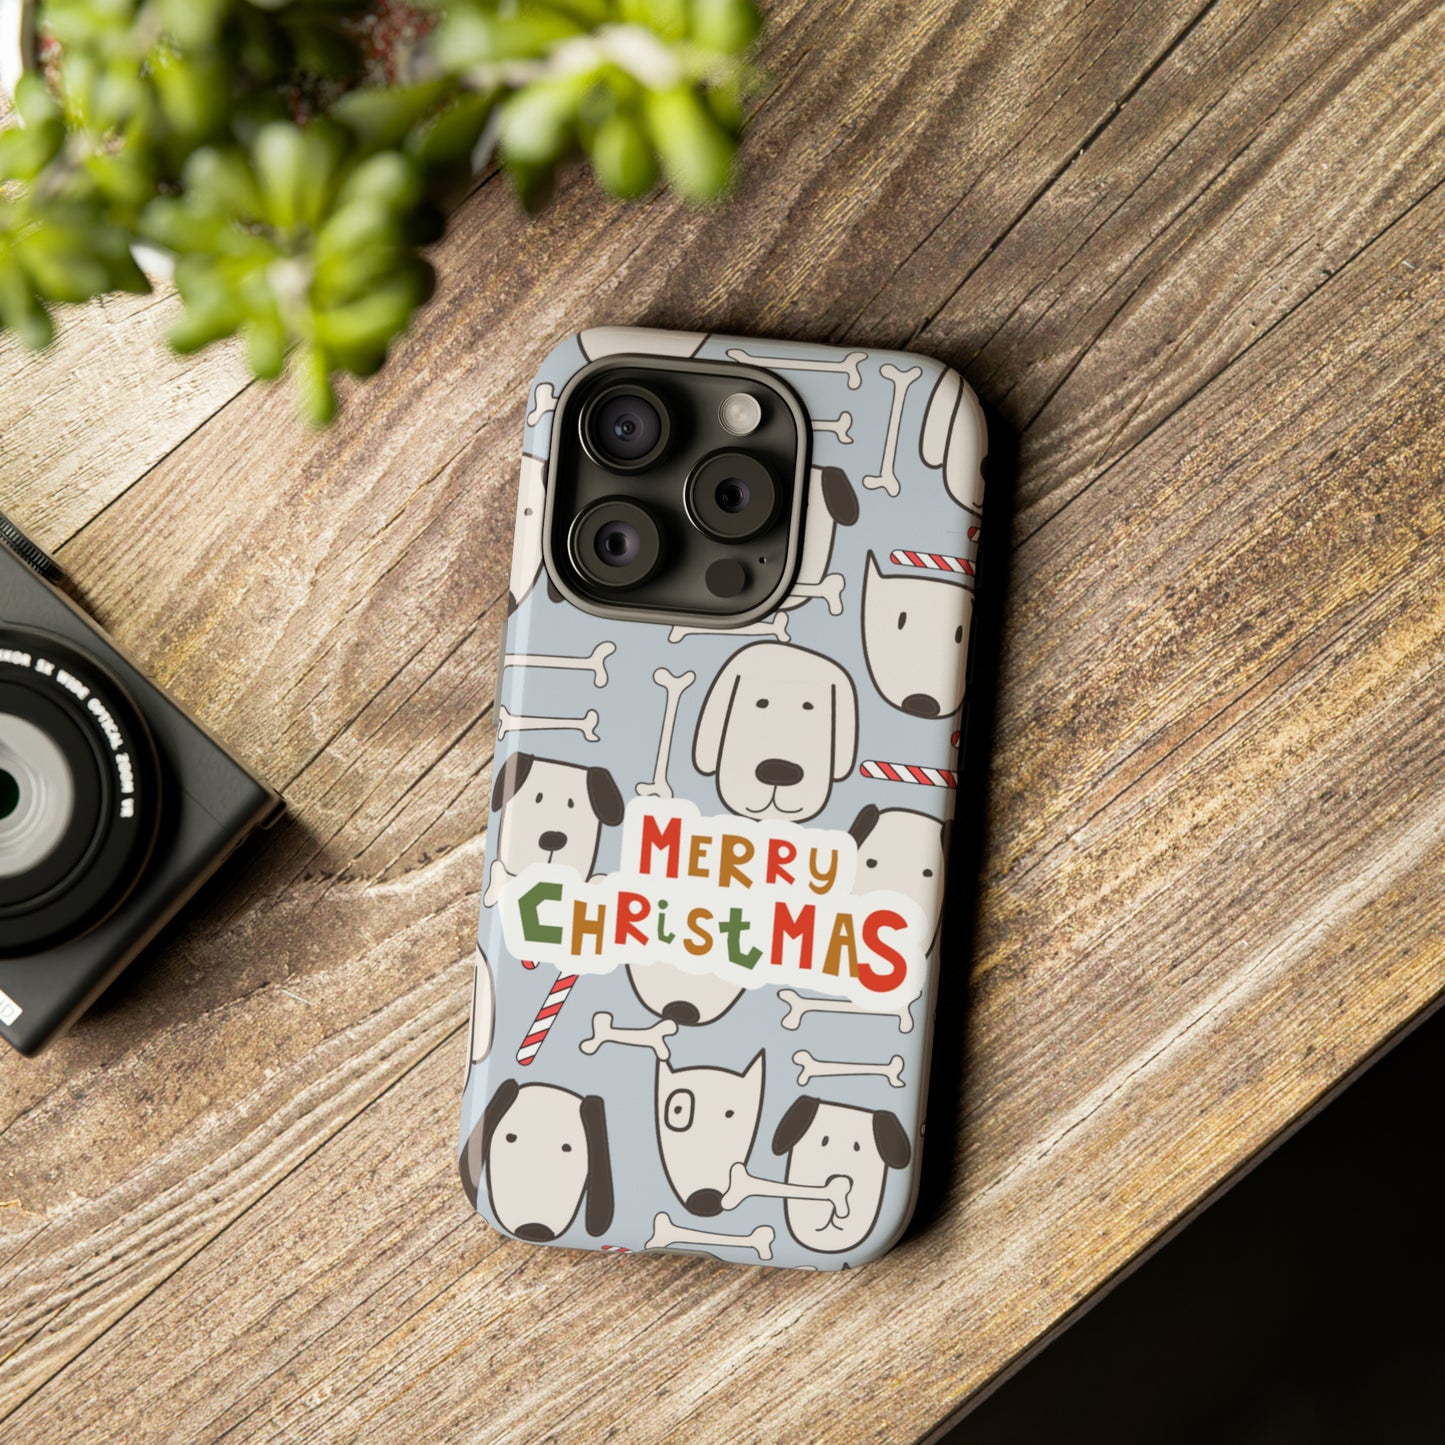 Merry Christmas Dog Pattern Tough Cases